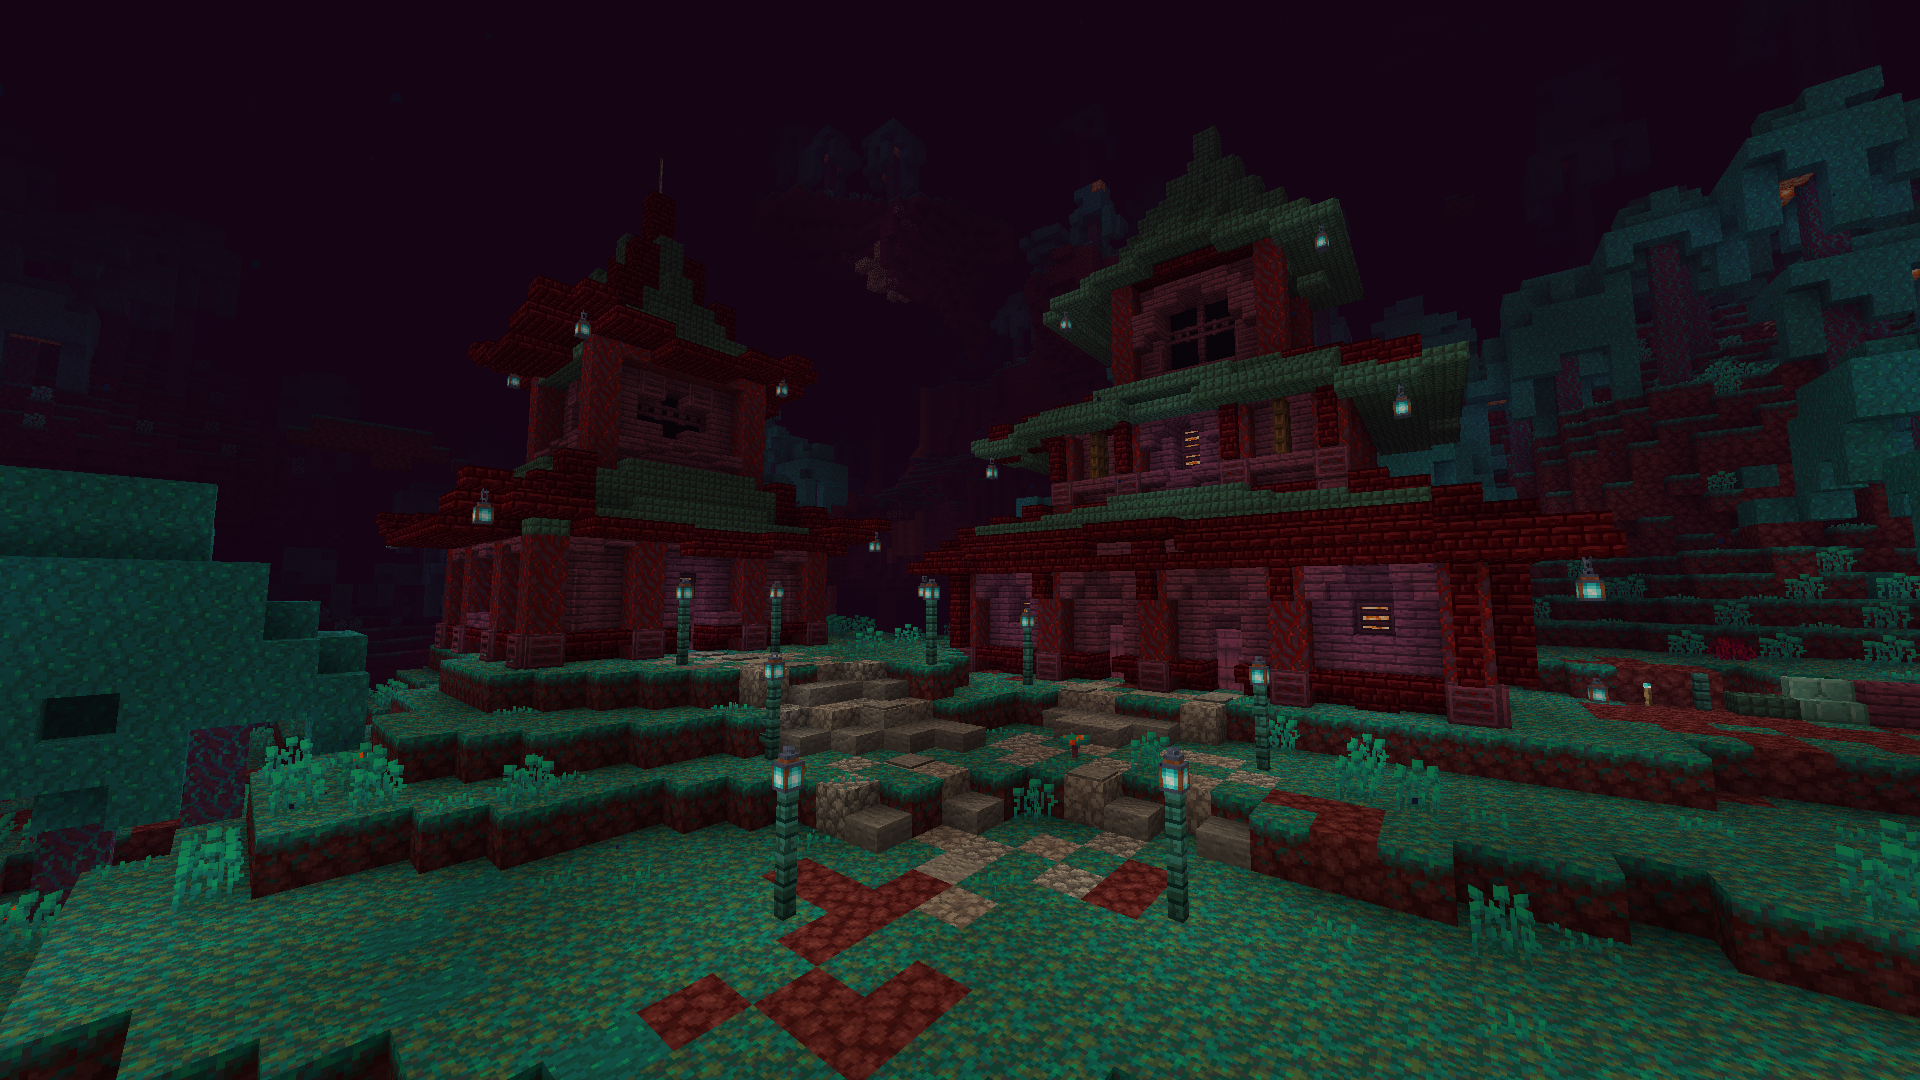 Wallpaper Minecraft Nether Update / New nether region snapshot update available for pc players ...